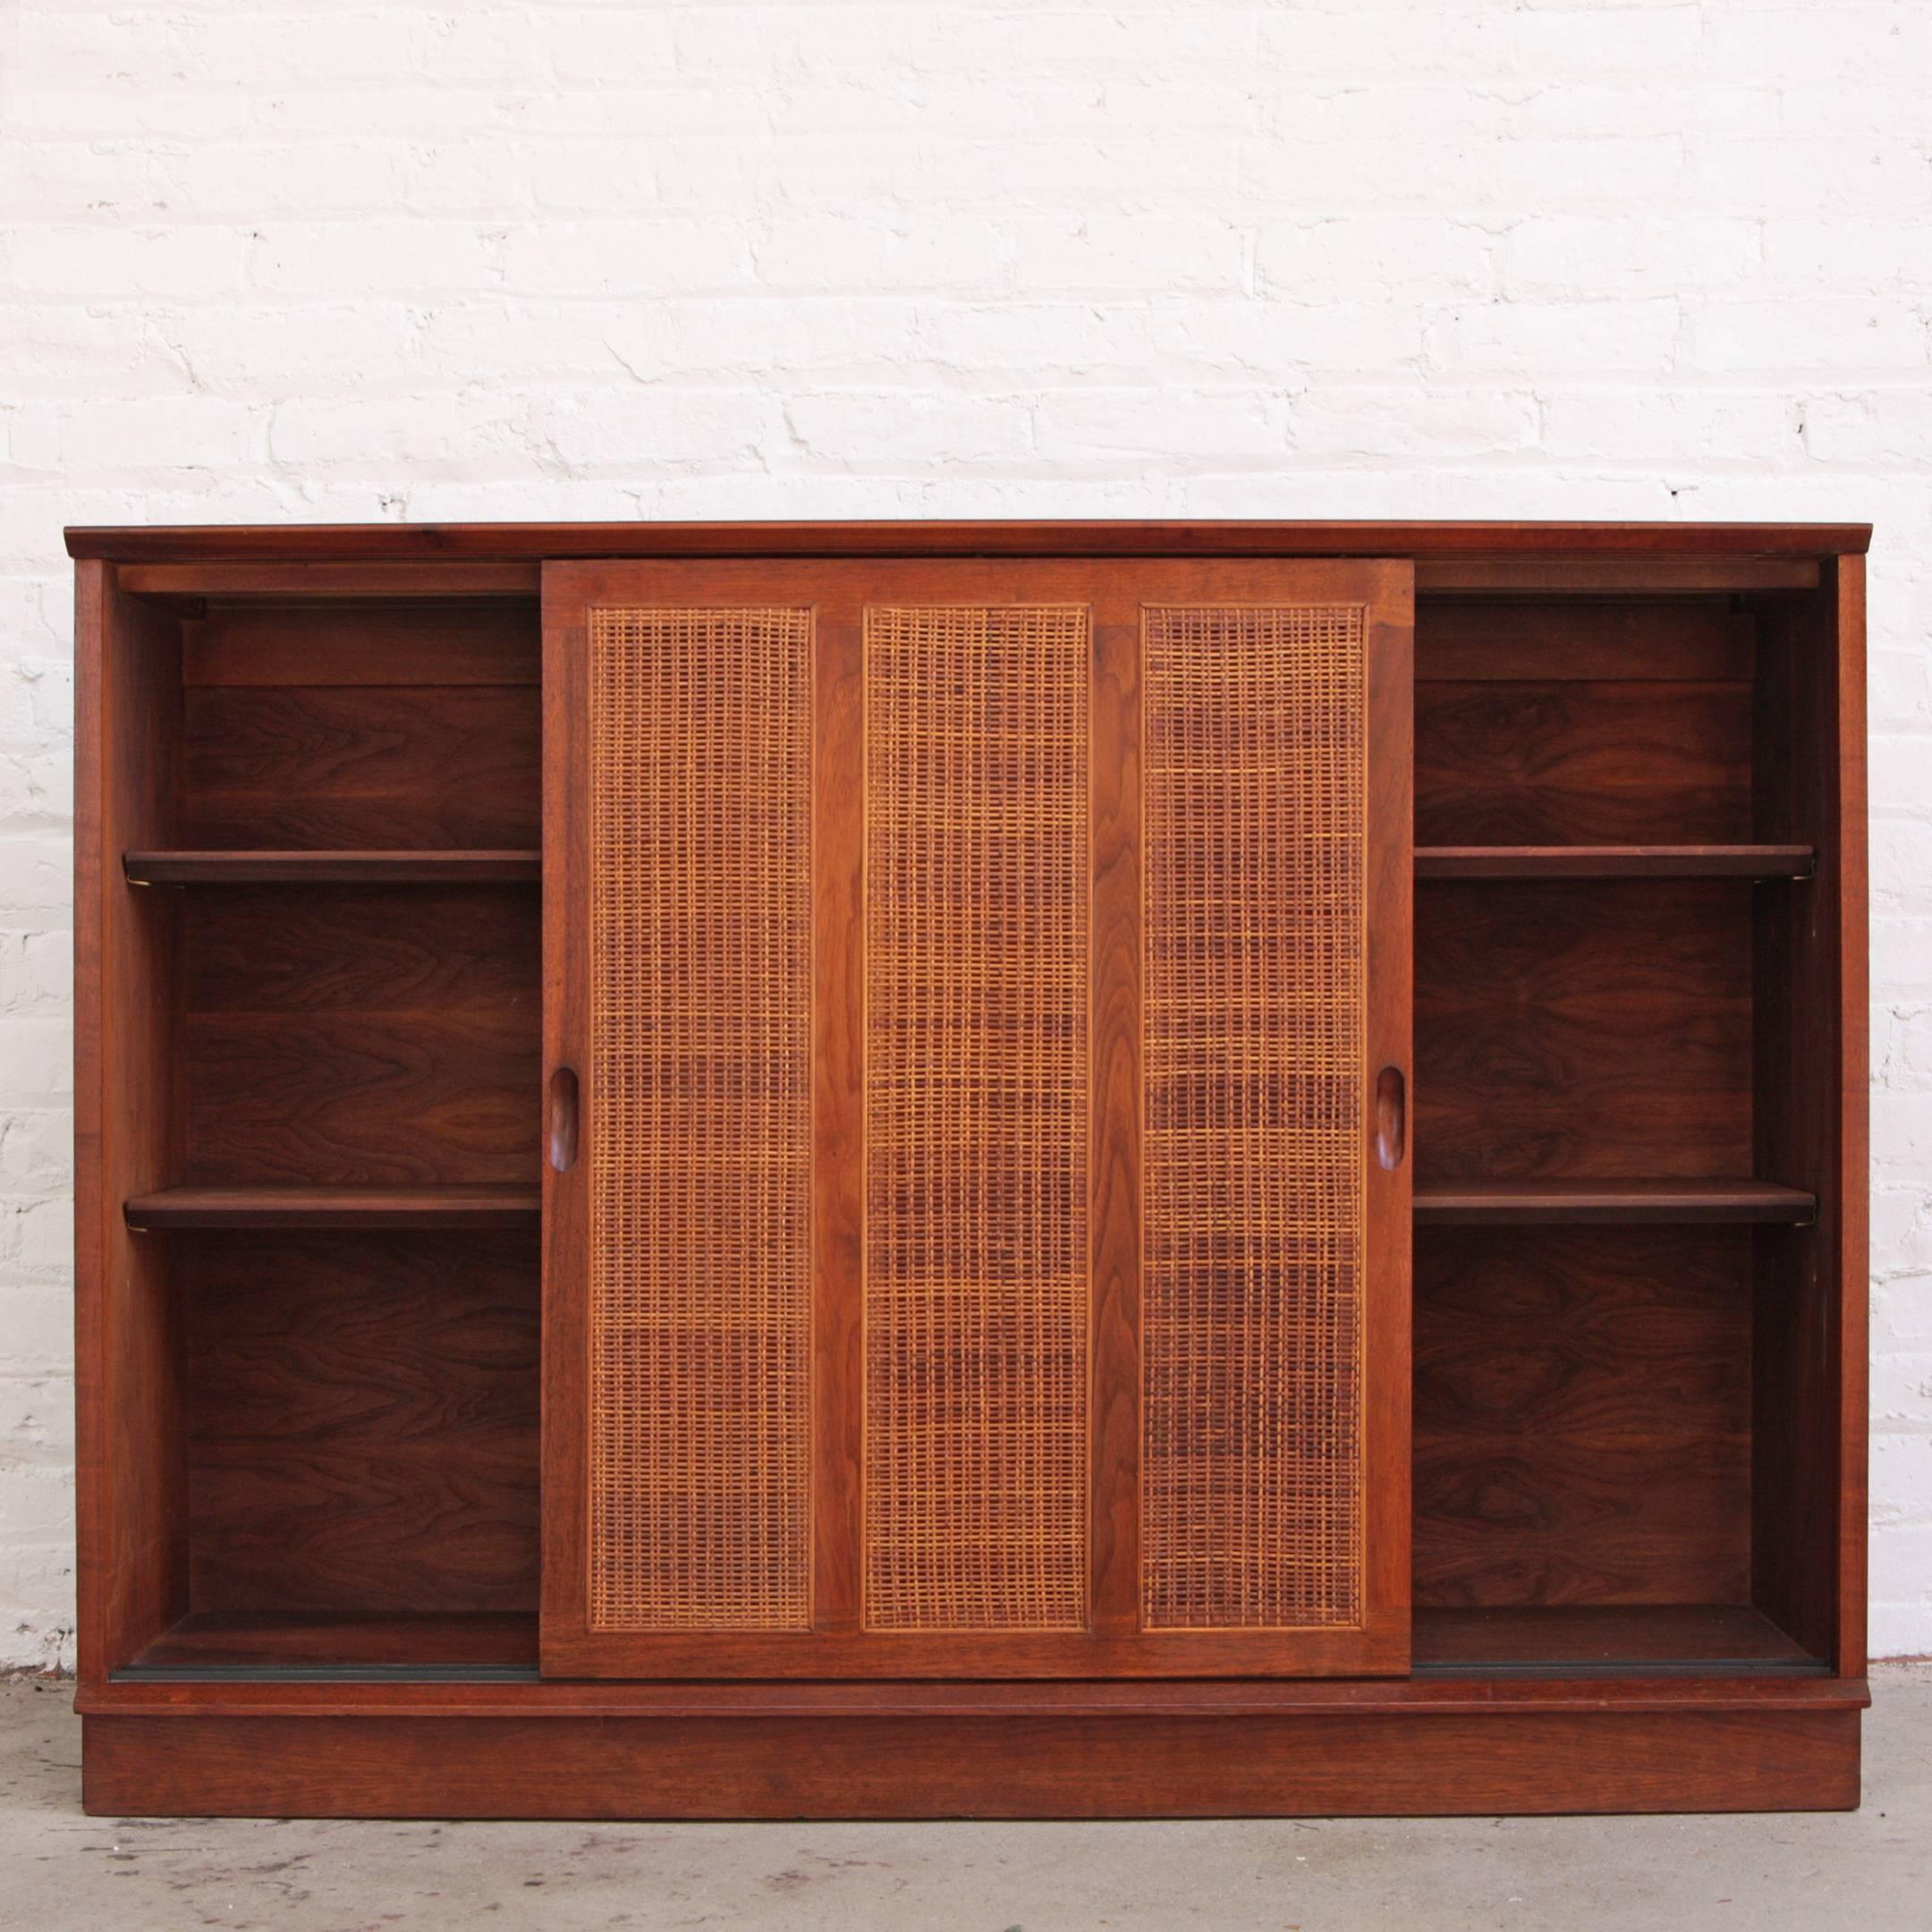 Stunning mahogany and cane sideboard or cabinet by Harvey Probber. Four interior adjustable shelves.